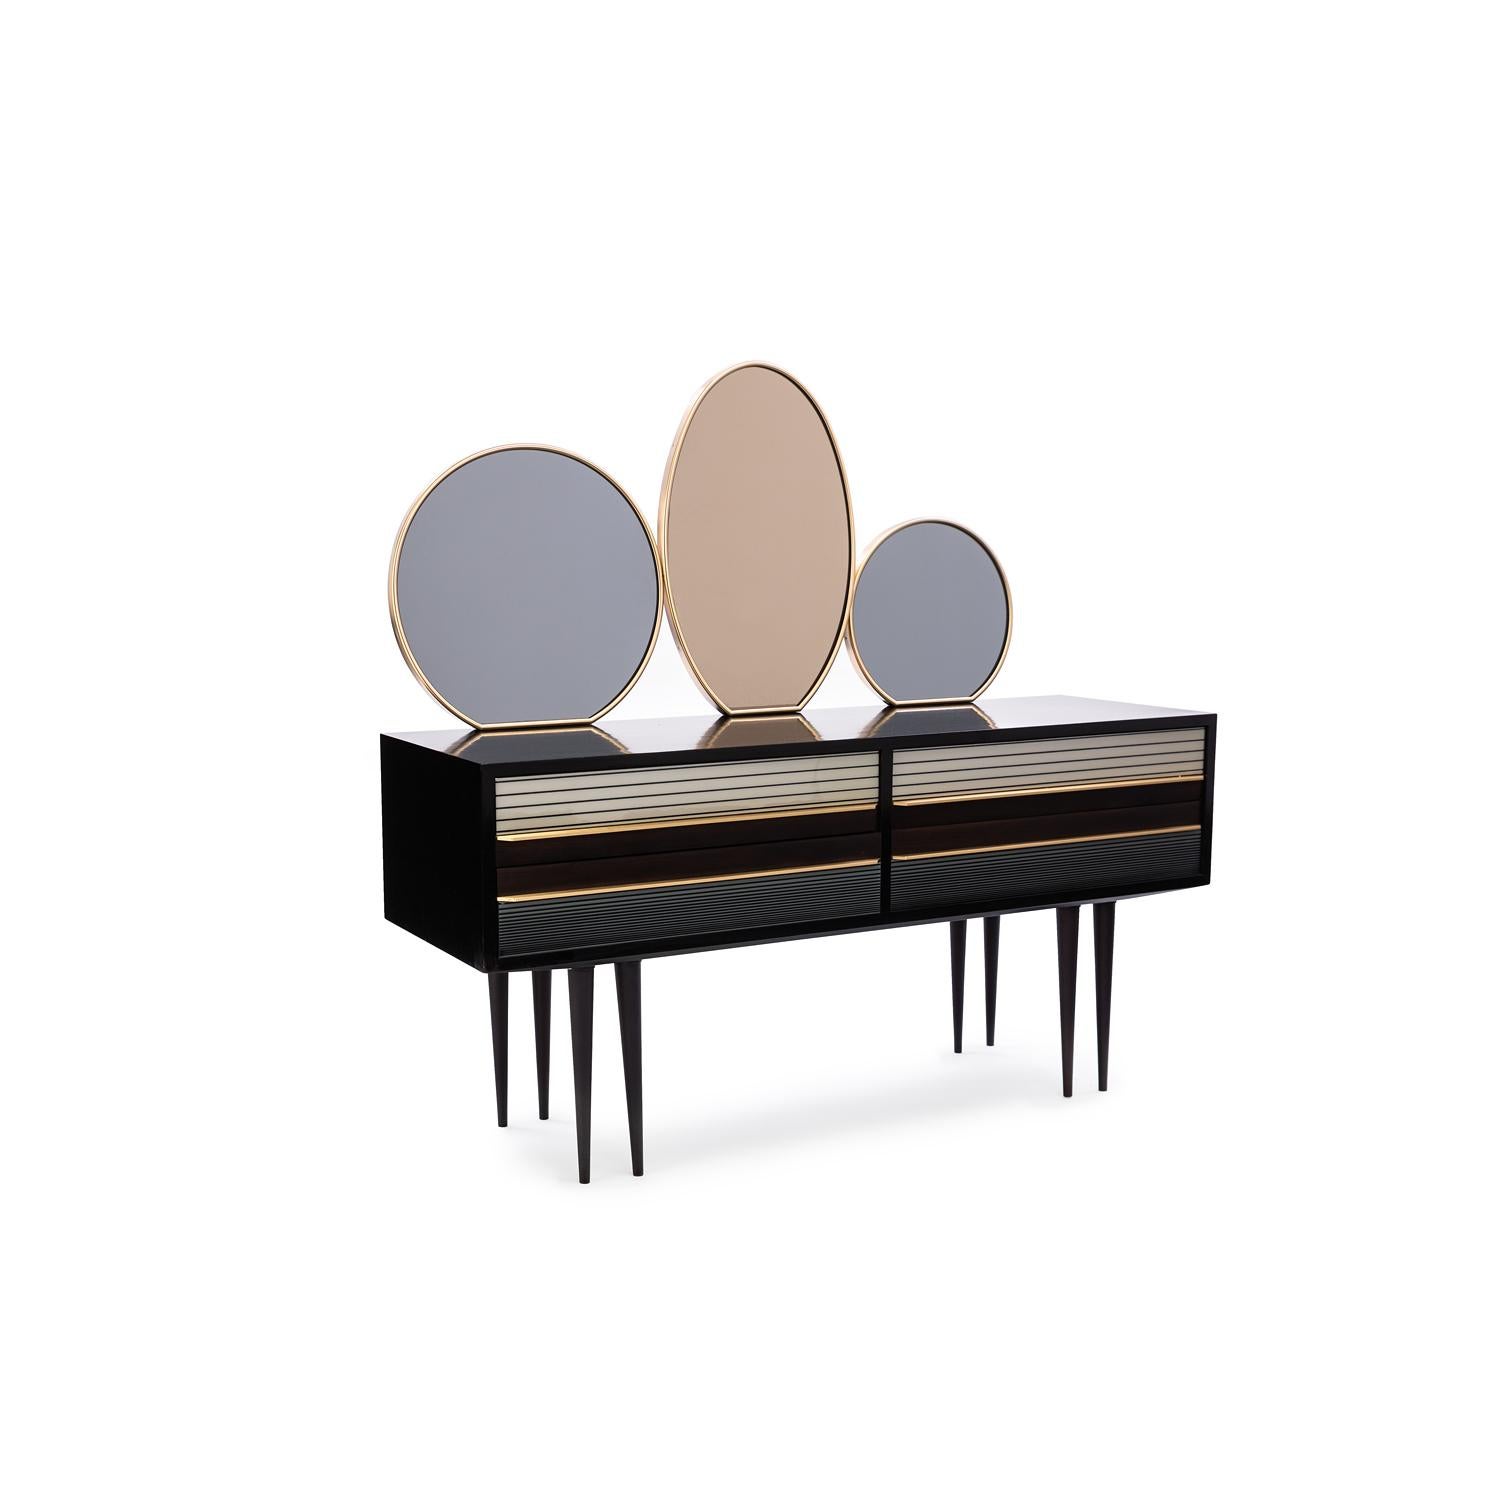 Baxter dark stained and natural-oil finished rosewood buffet no.2 featuring Avio and rose tinted lunar mirrors, accented by Satin Brass hardware, circa 1950, Italy by Draga & Aurel

Salone 2016 Italian inspired 1950s made In Italy.